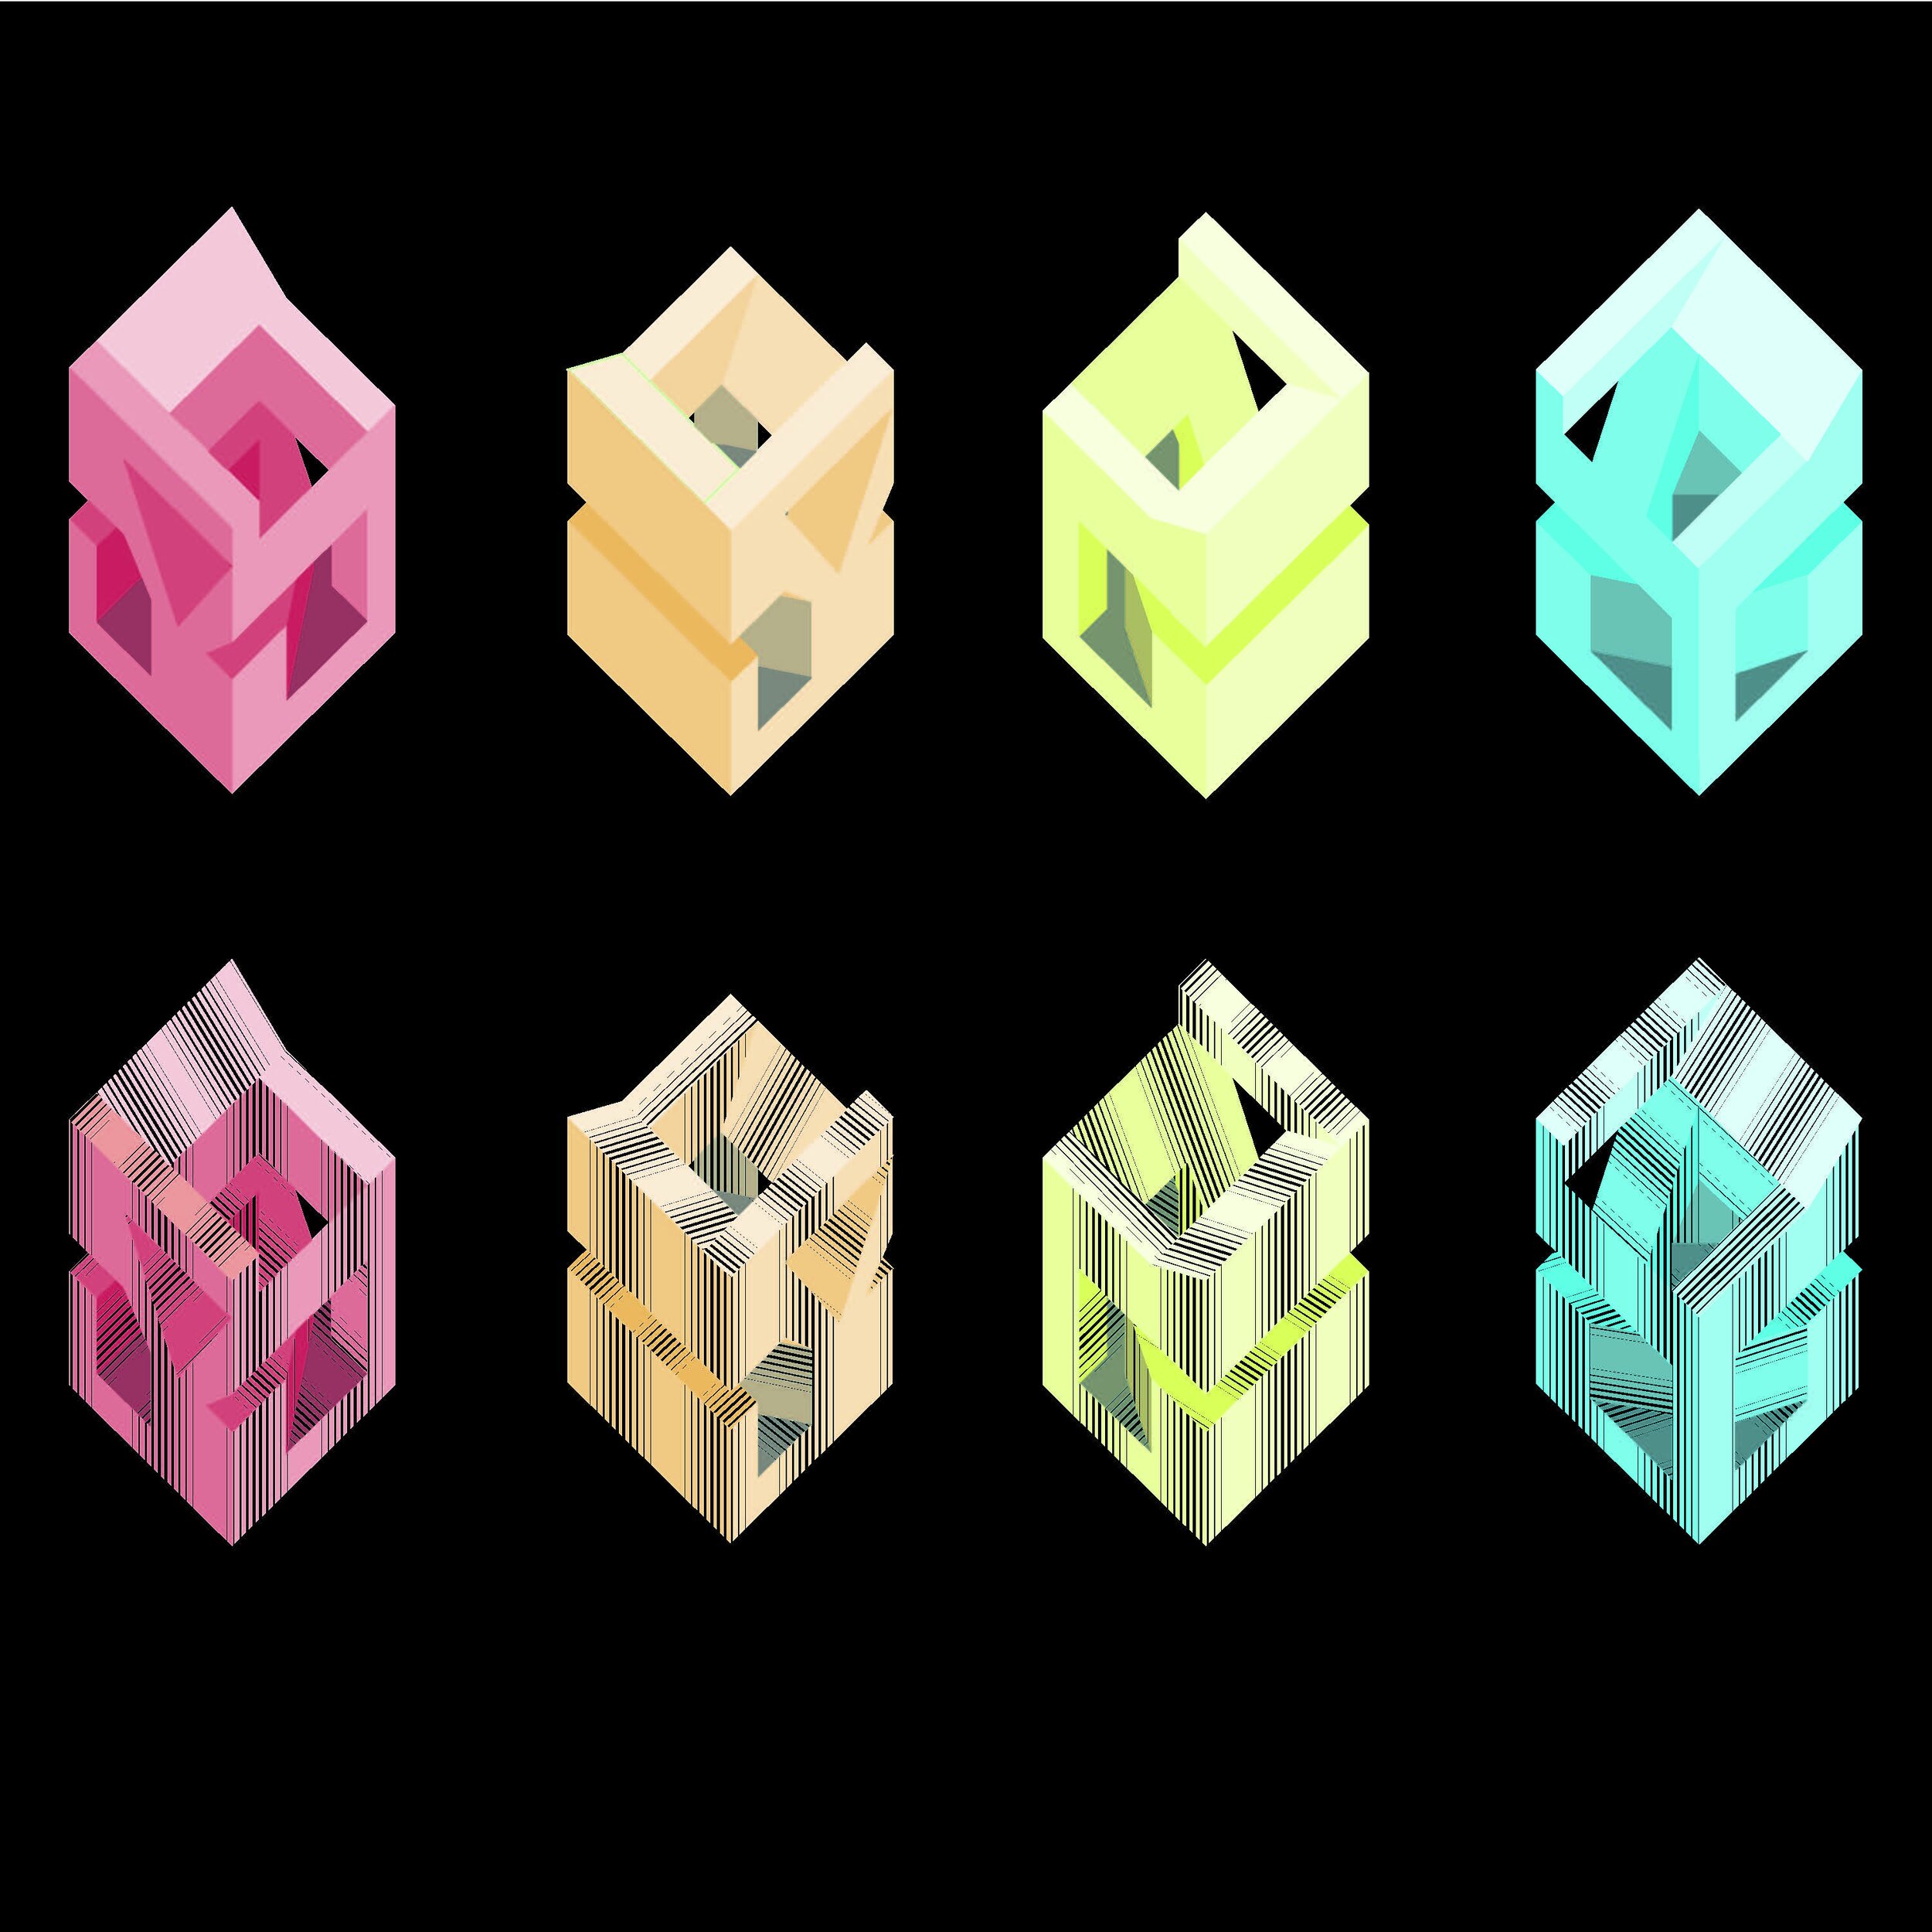 Cubes_Page_2.jpg